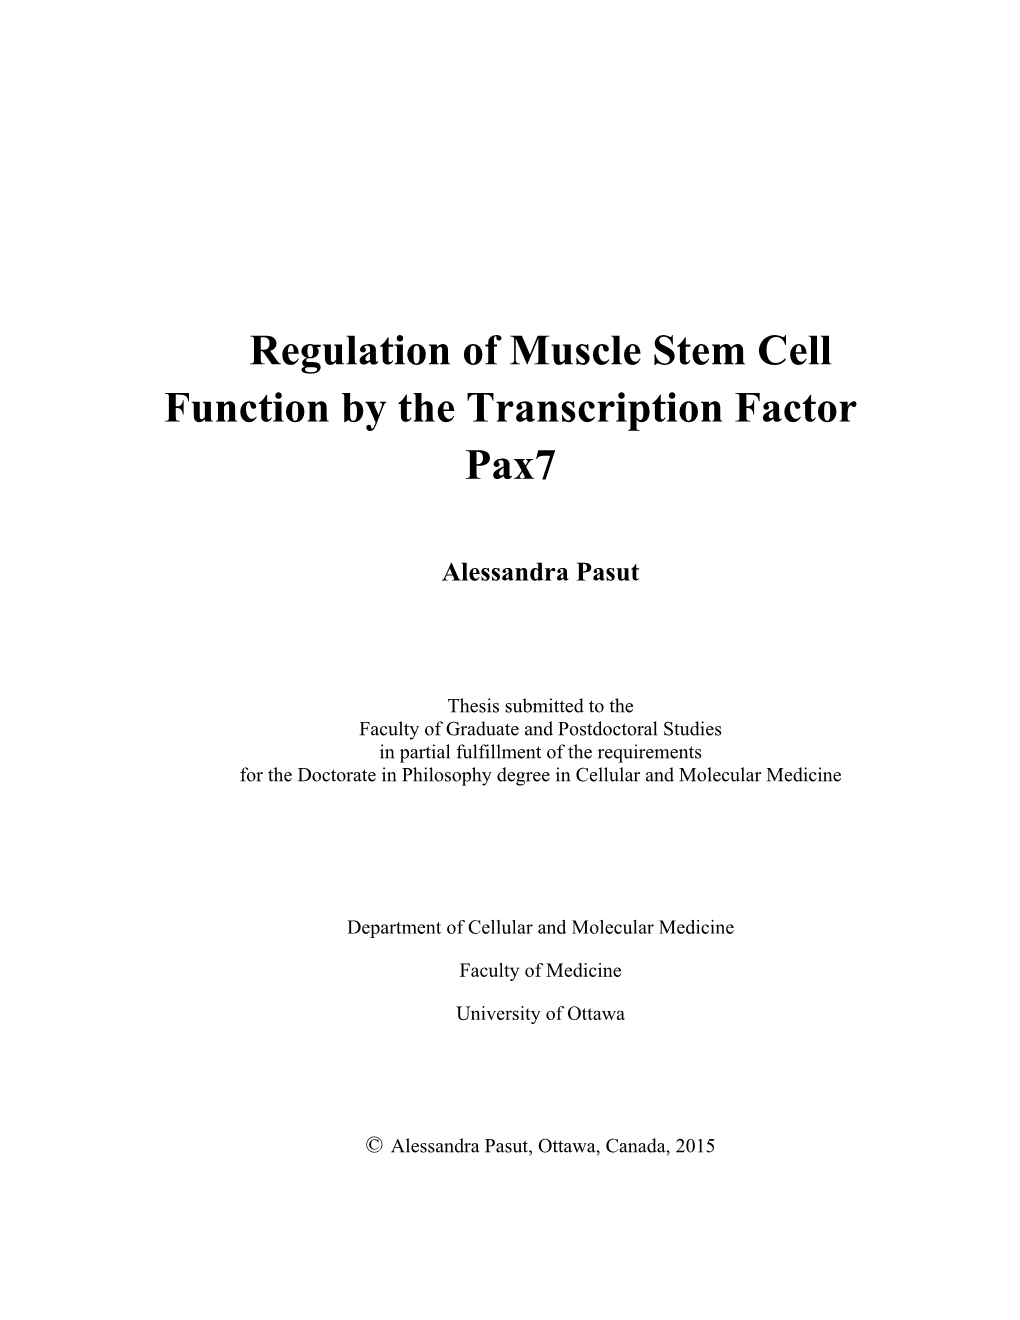 Regulation of Muscle Stem Cell Function by the Transcription Factor Pax7